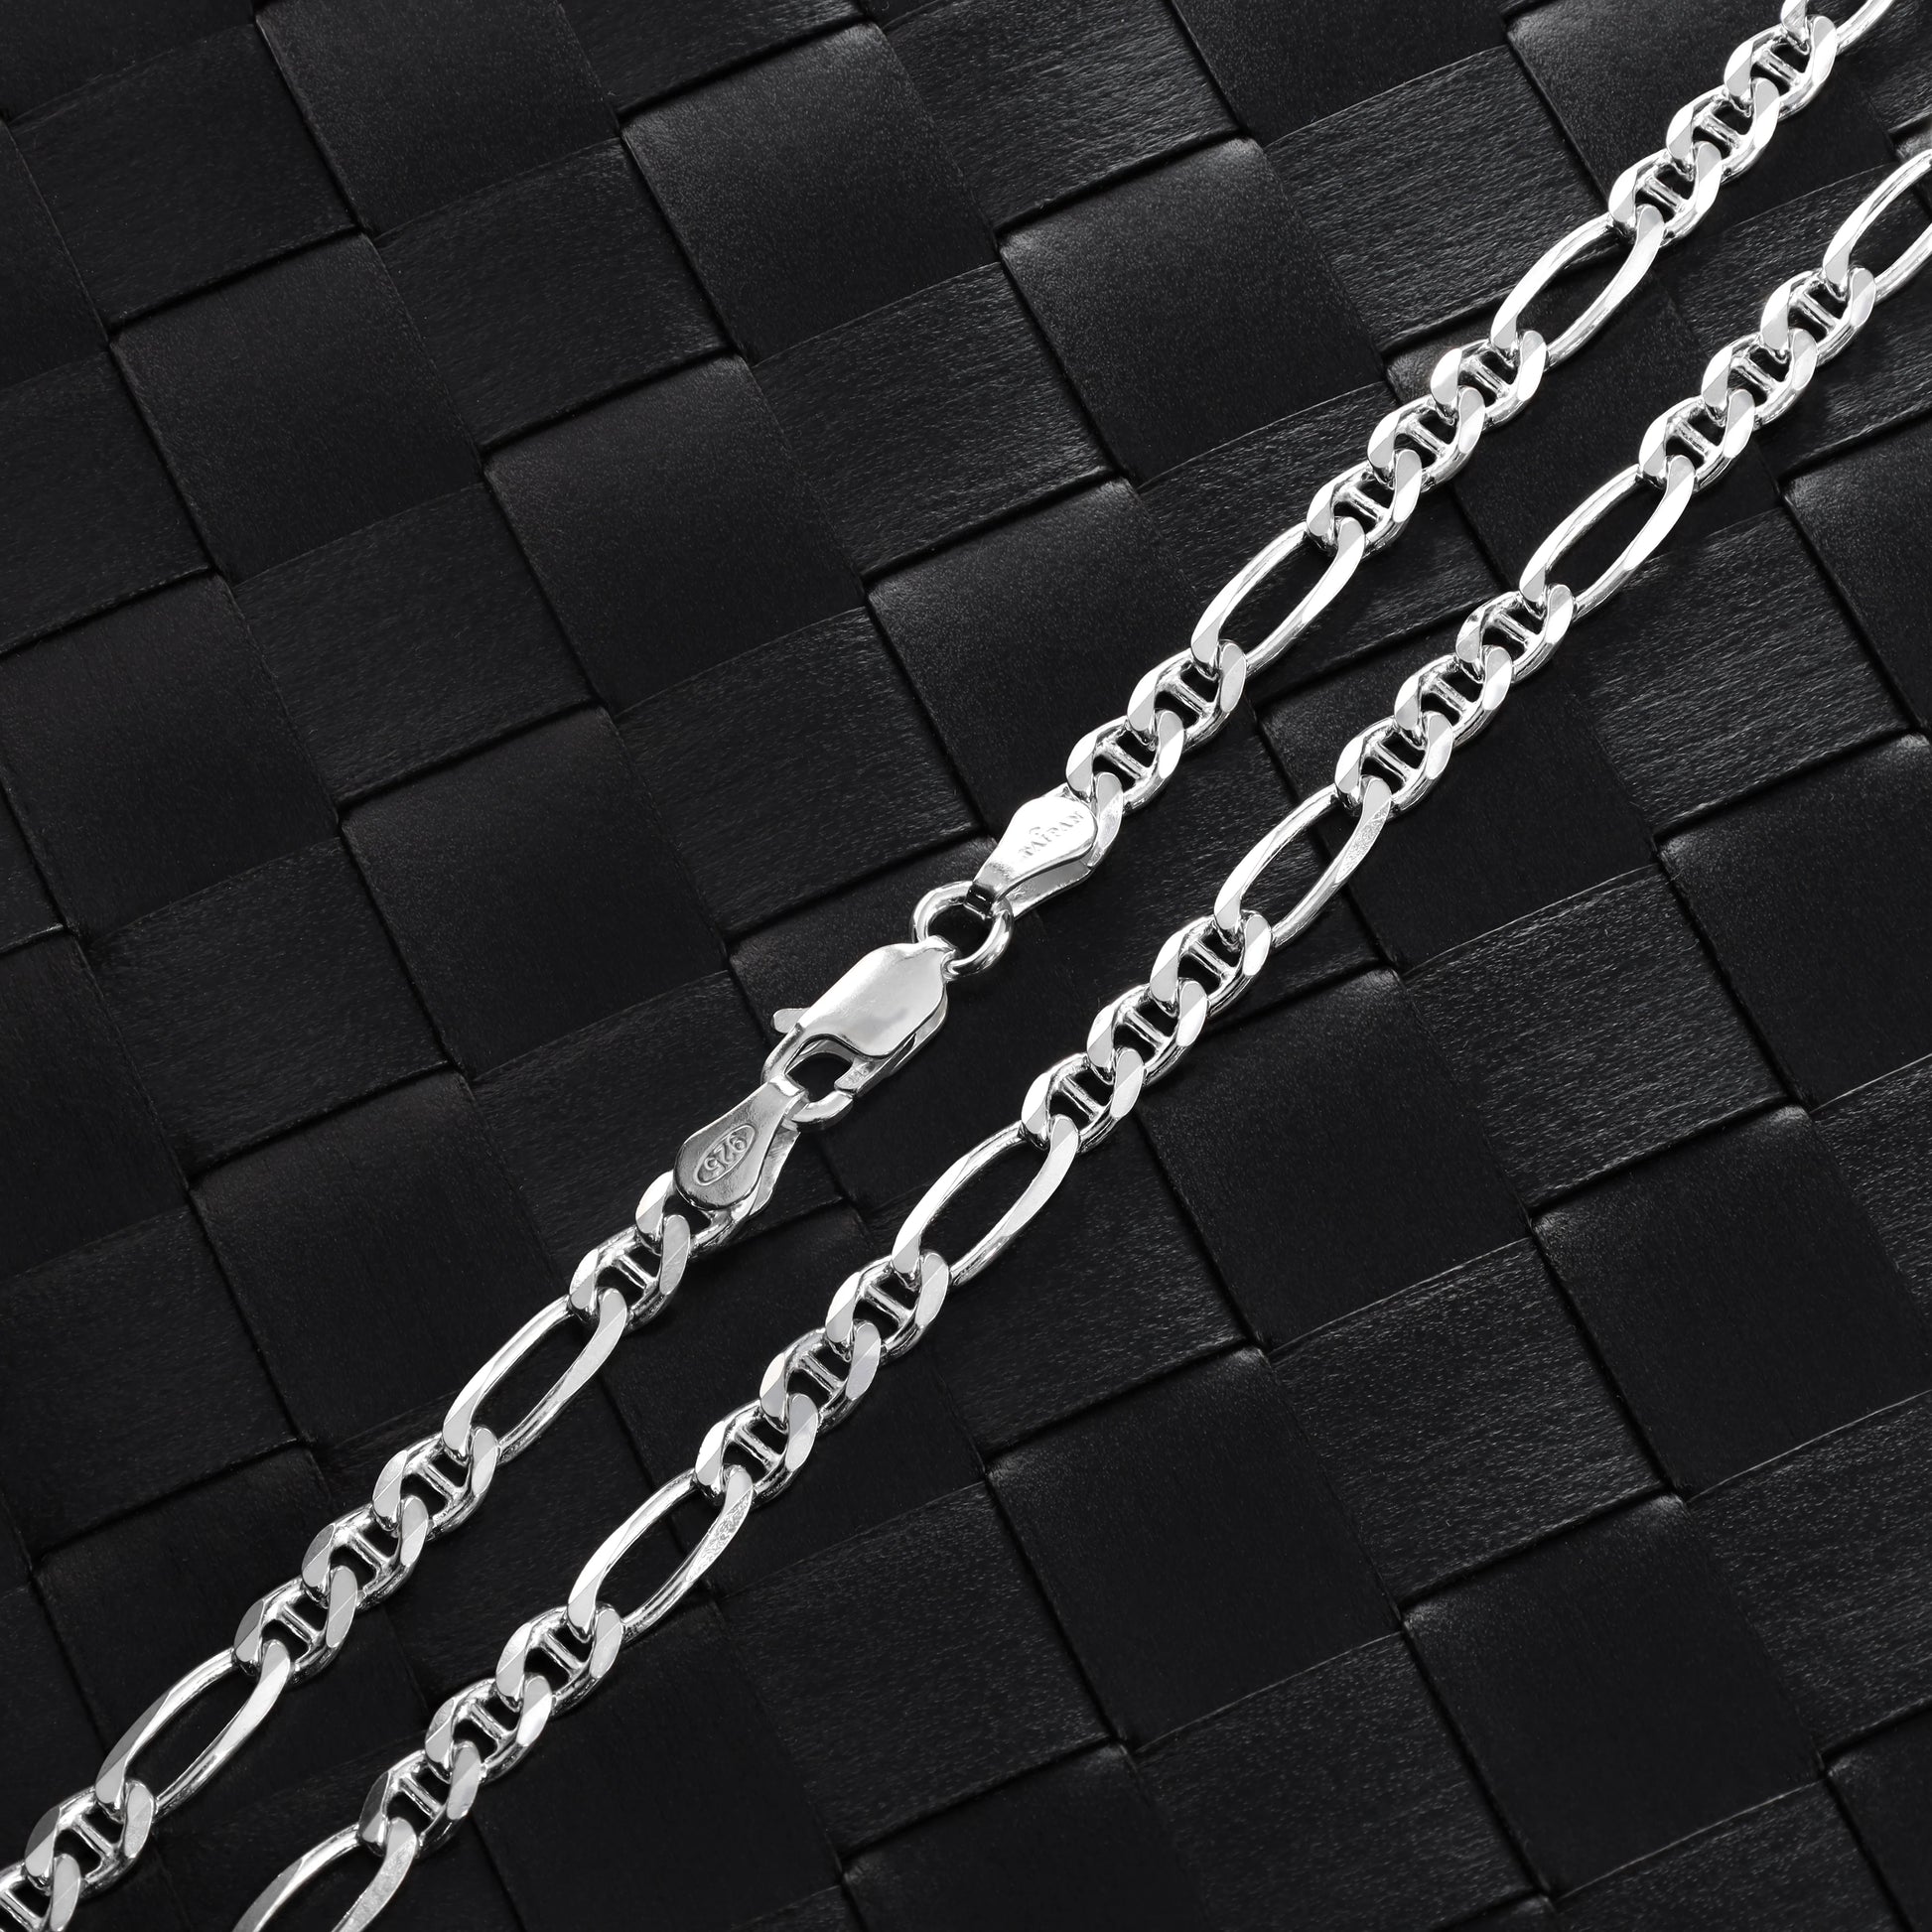 Figarucci Kette 4mm breit 70cm lang 925 Sterlingsilber Made in Italy (K598) - Taipan Schmuck